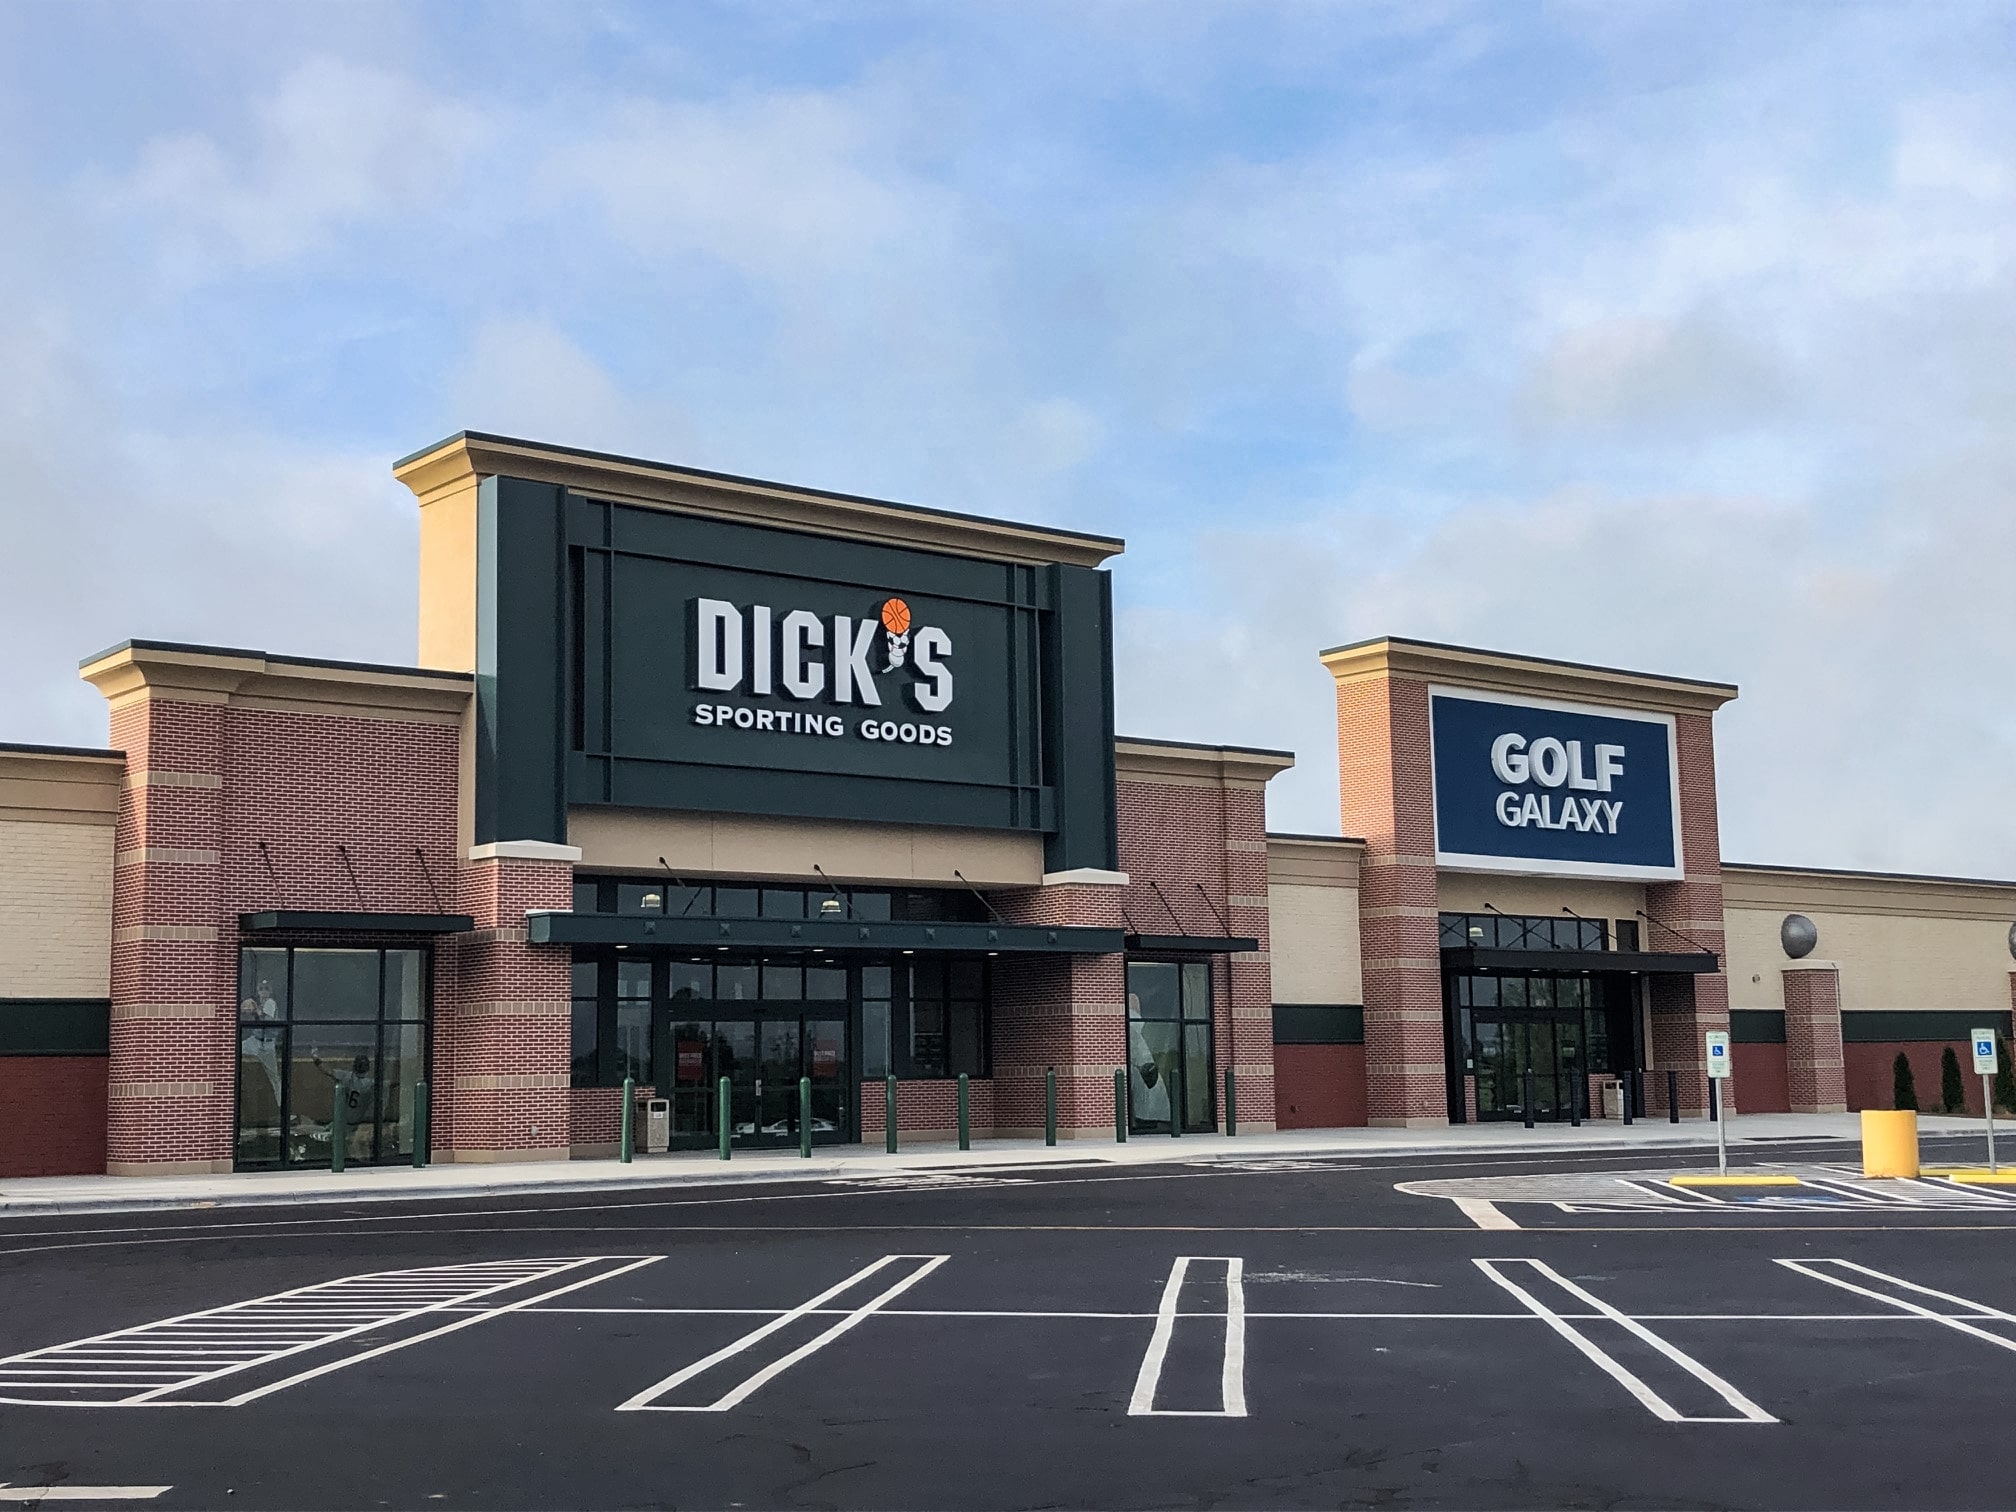 DICK'S Sporting Goods Announces Grand Opening of Three Stores in Three States in September